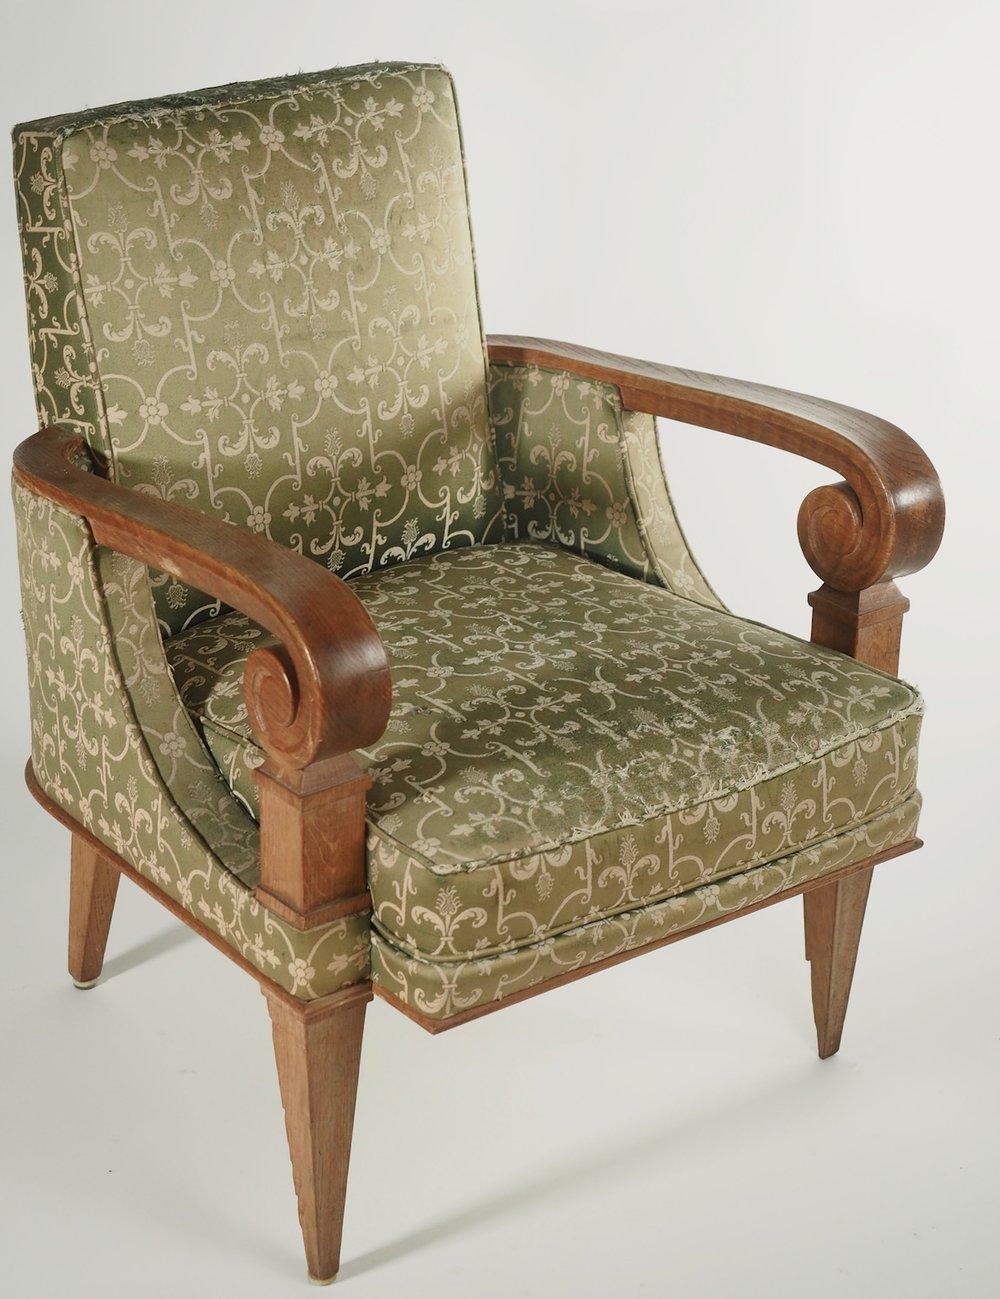 French Art Deco pair of gracious-sized armchairs, design attributed to Pierre Lardin. Unrestored in the photographs. Price includes restoration, refinishing and reupholstering with buyer’s fabric.